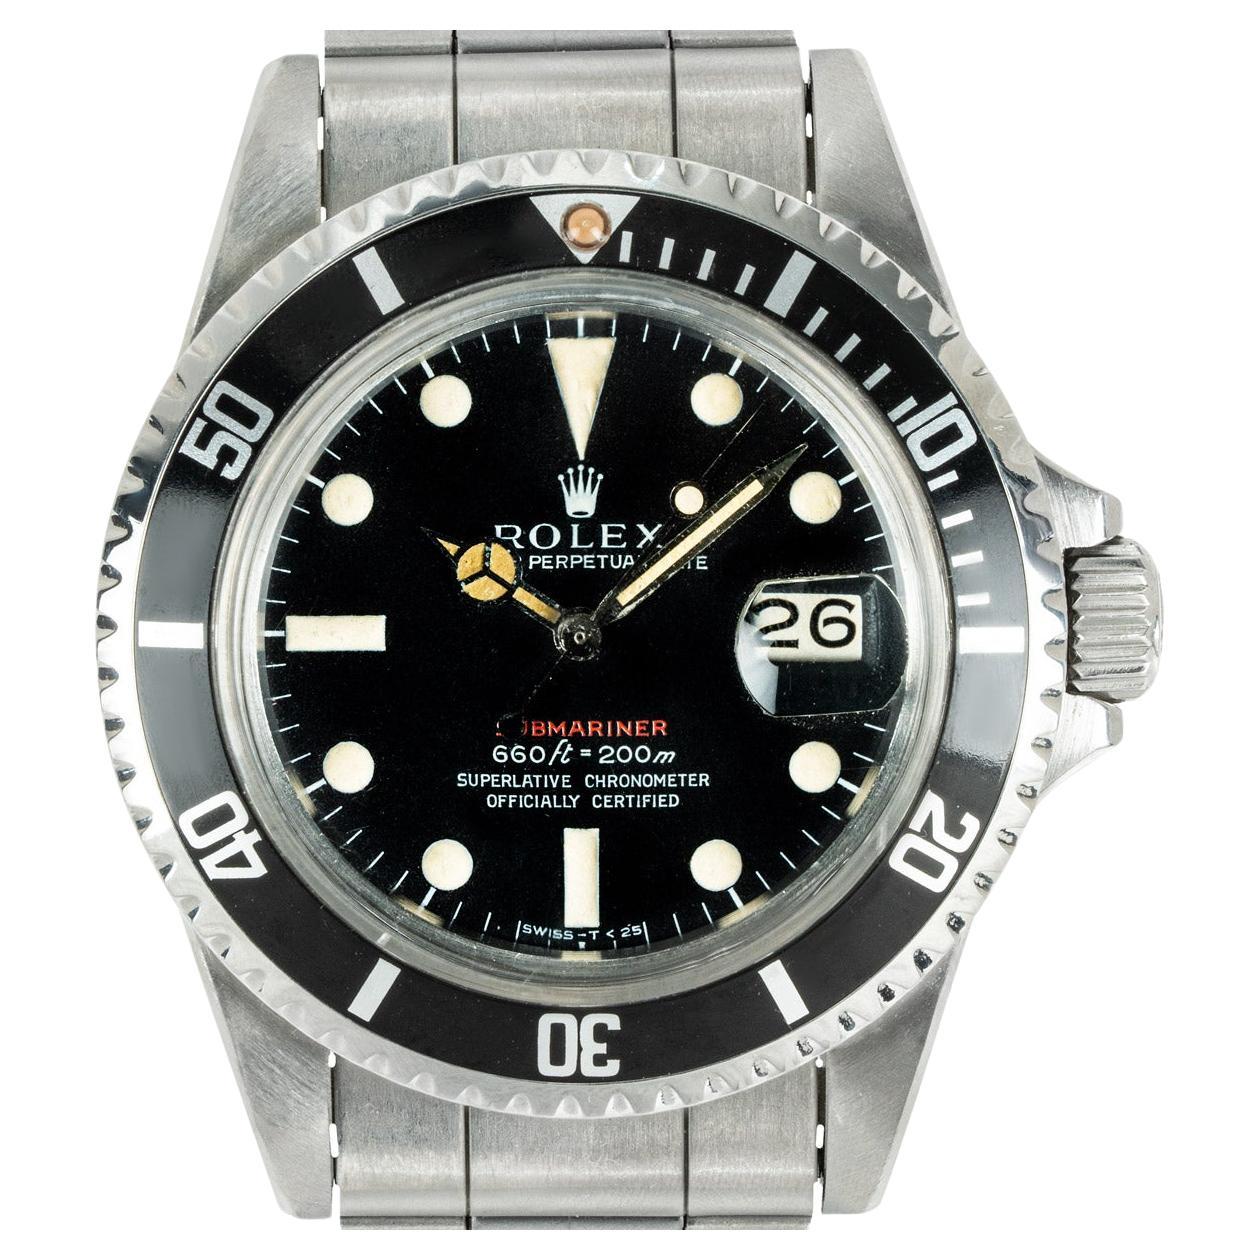 A vintage 40mm Rolex Submariner in stainless steel. Featuring a distinctive mark IV black dial with open sixes, and a stainless steel bi-directional rotating bezel. Fitted with a plastic glass and a self-winding automatic movement. The watch is